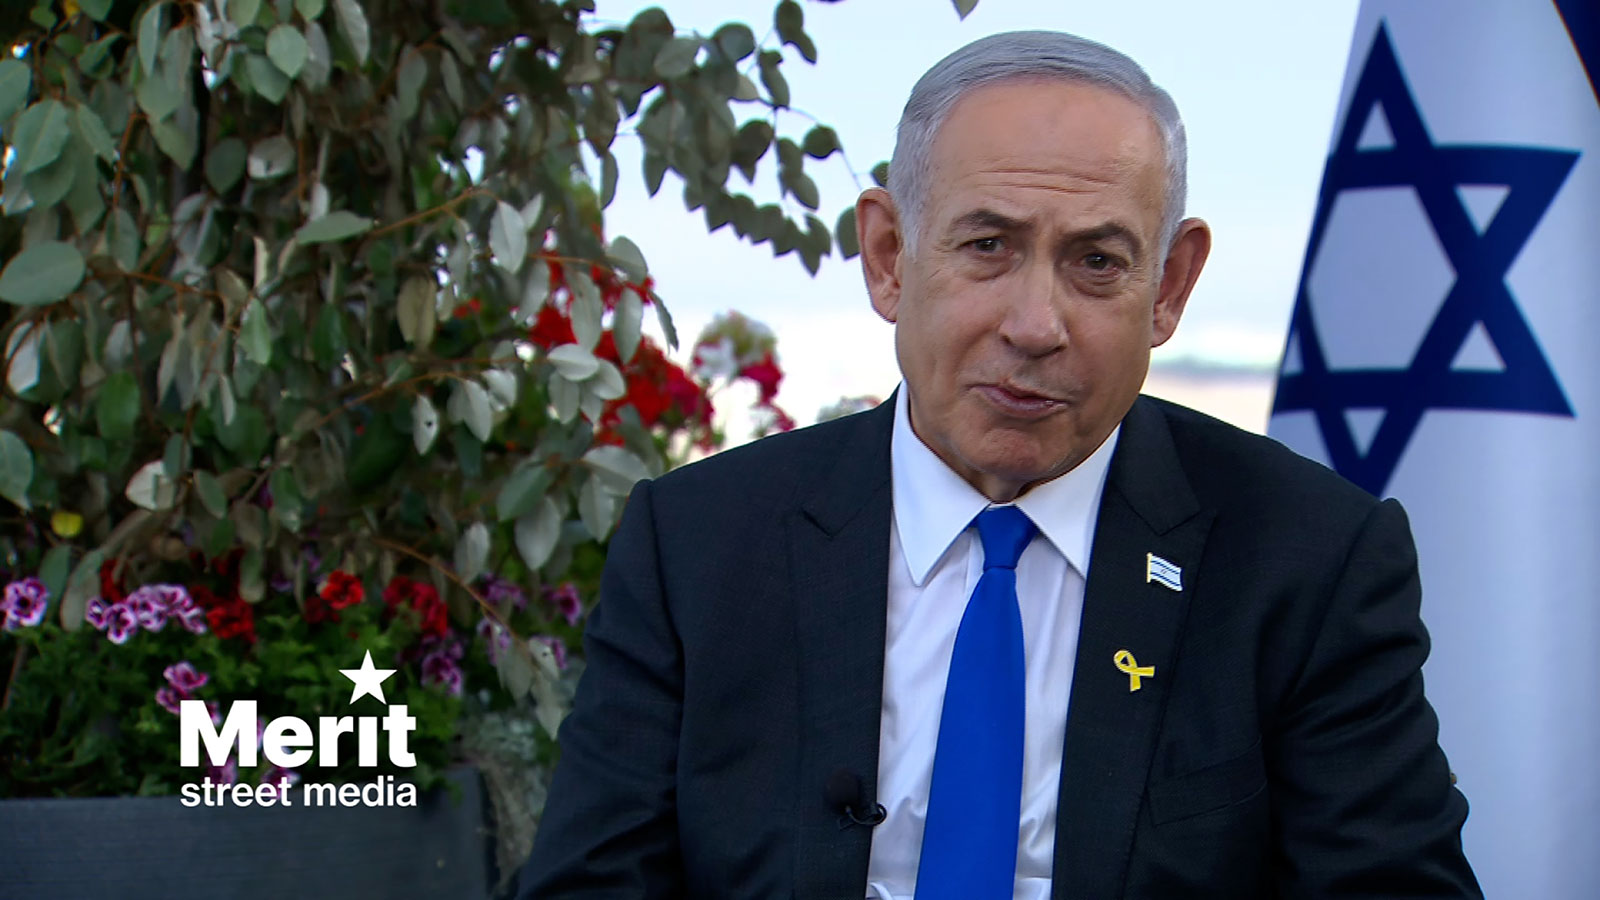 Israel Prime Minister Benjamin Netanyahu appears during an interview with the American talk show host known as Dr. Phil on Thursday, May 9.